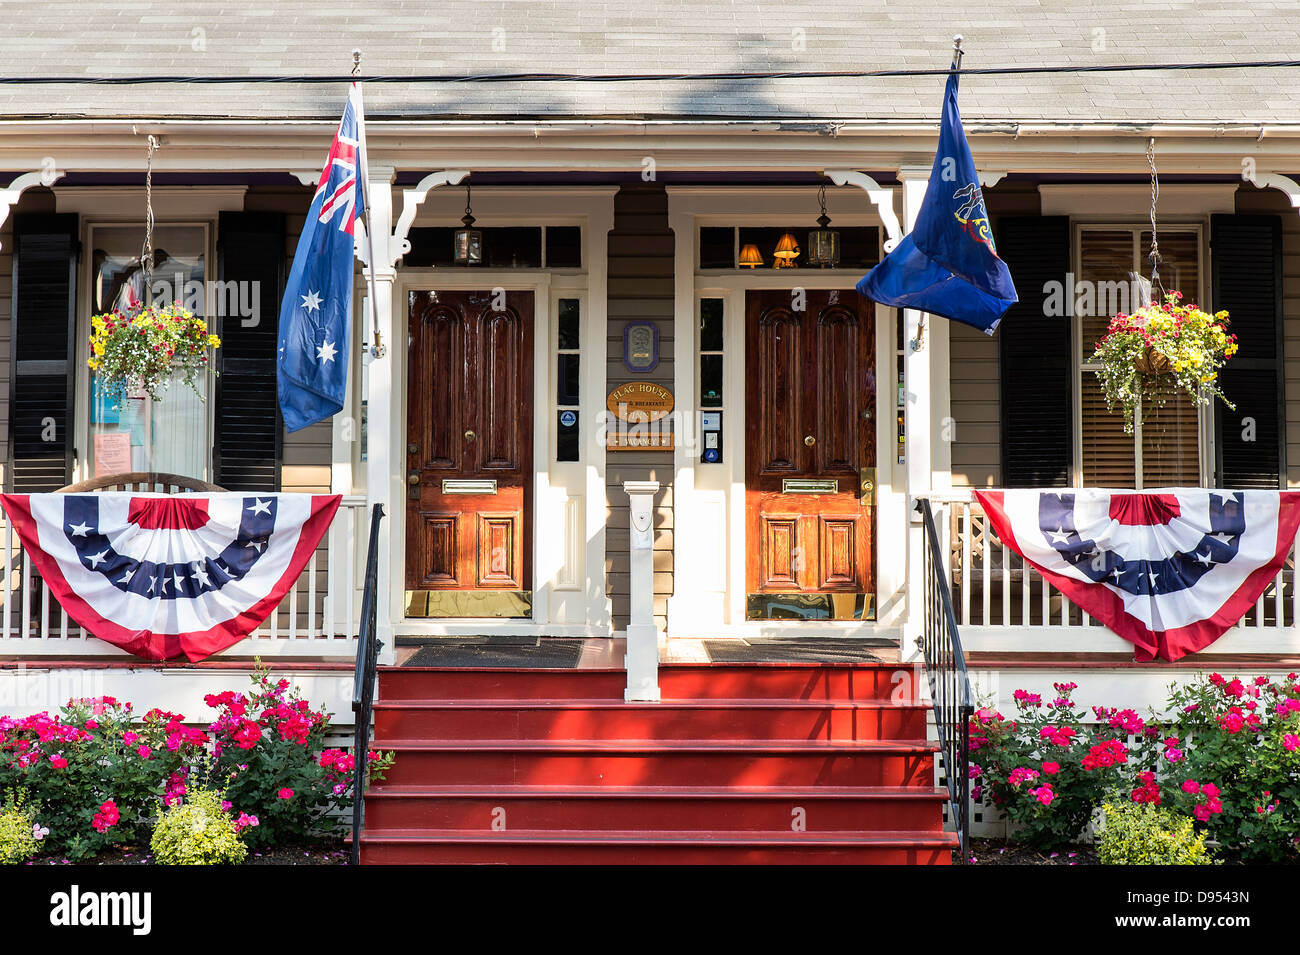 Flag House B&B, Annapolis, Maryland, USA Banque D'Images